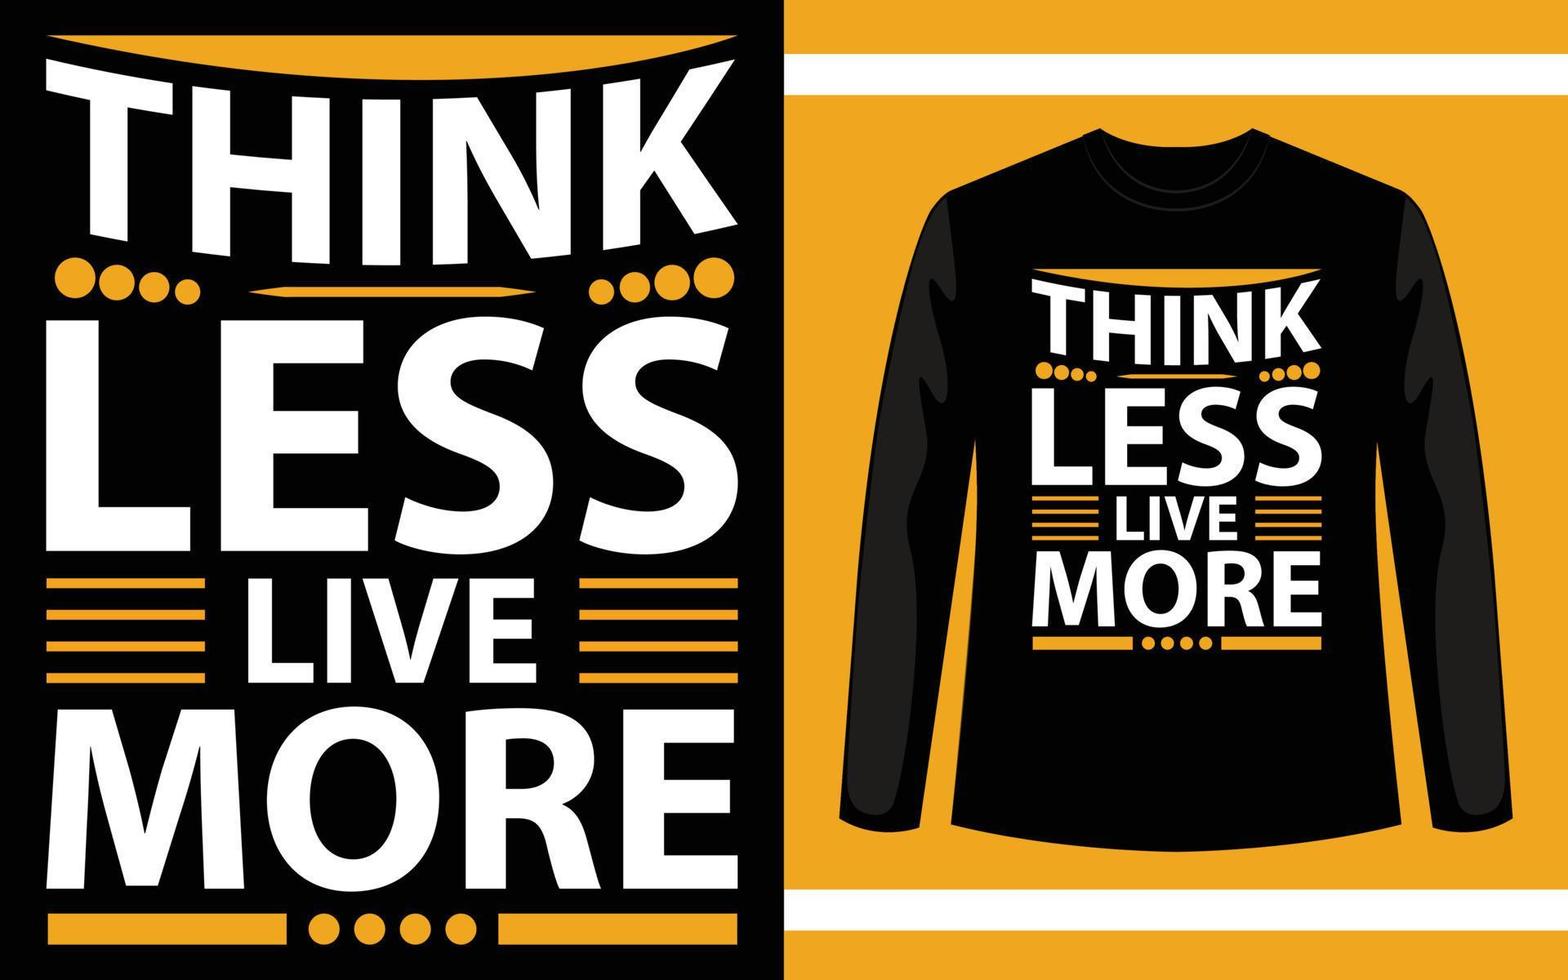 Think less live more typography motivation quote design for t shirt or merchandise vector